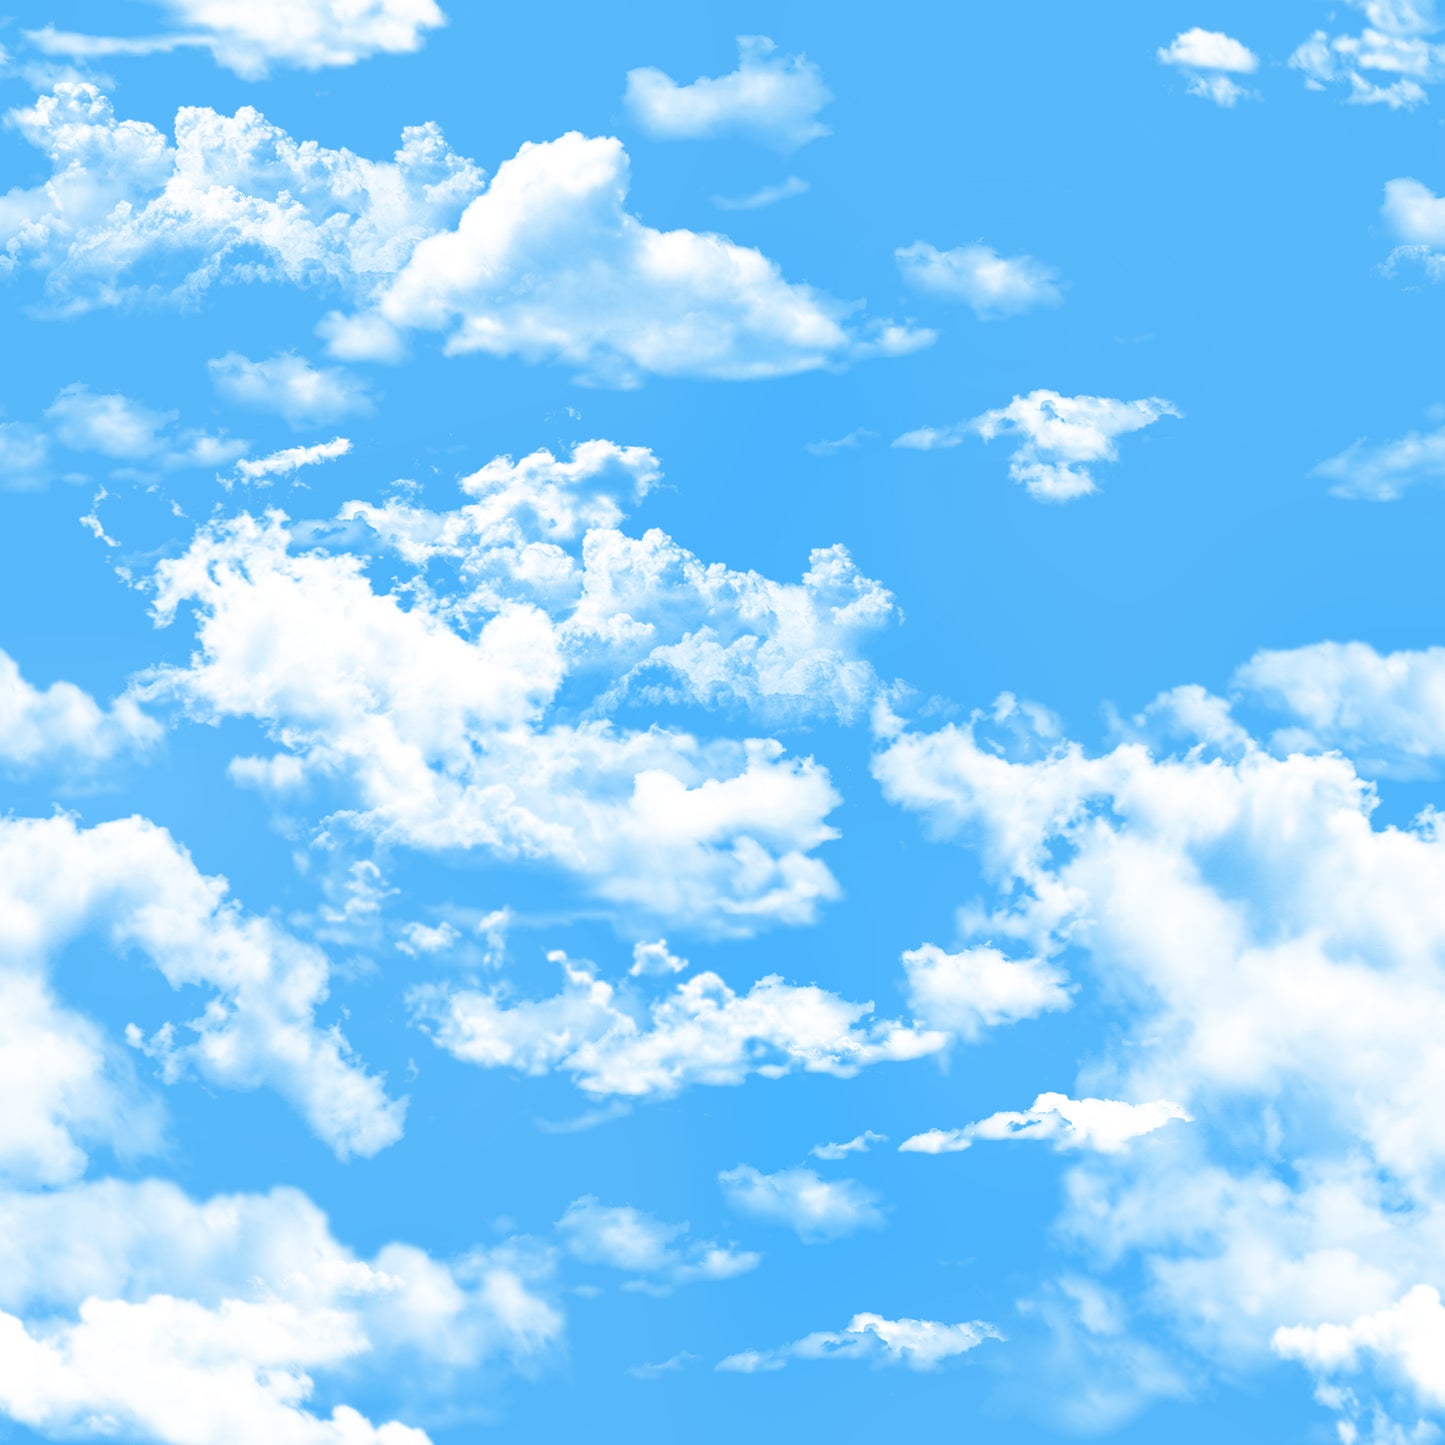 Summer Skies - Blue Sky and Clouds 003